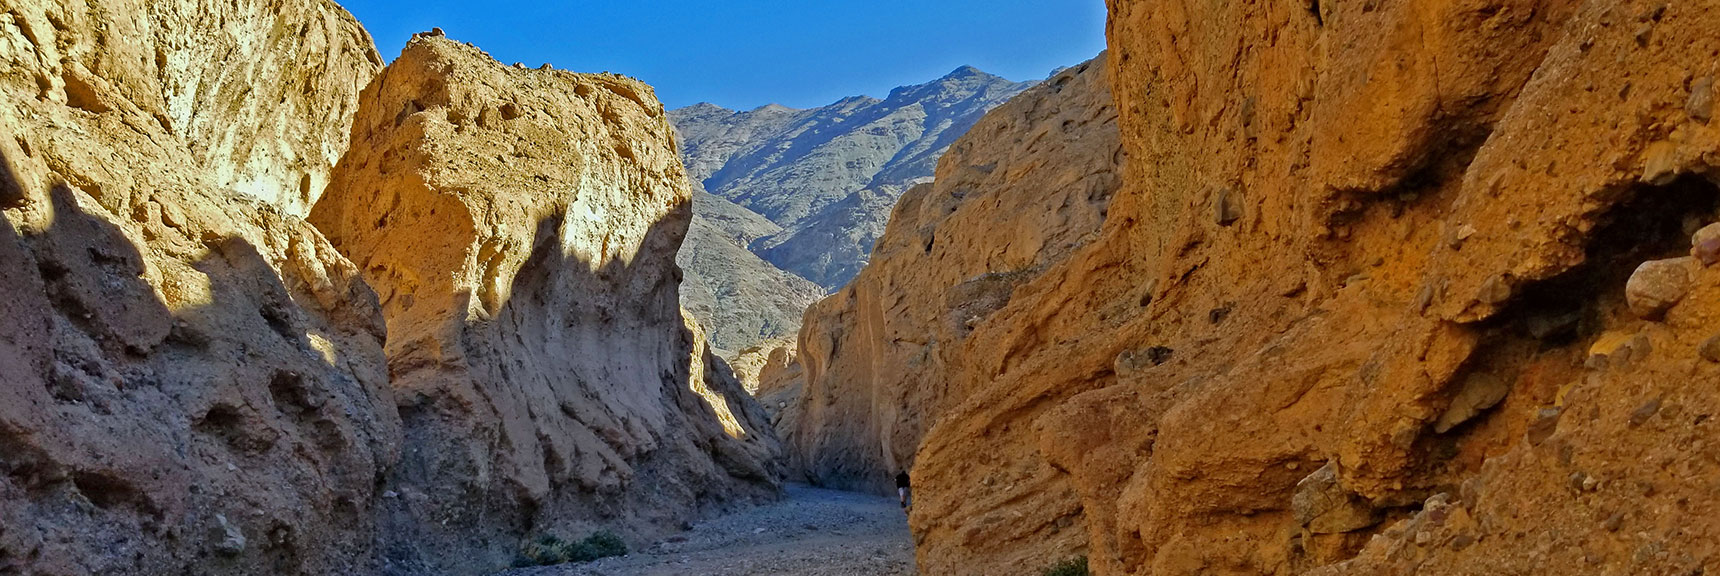 Second Slot Opens Up Now and Then | Sidewinder Canyon | Death Valley National Park, California